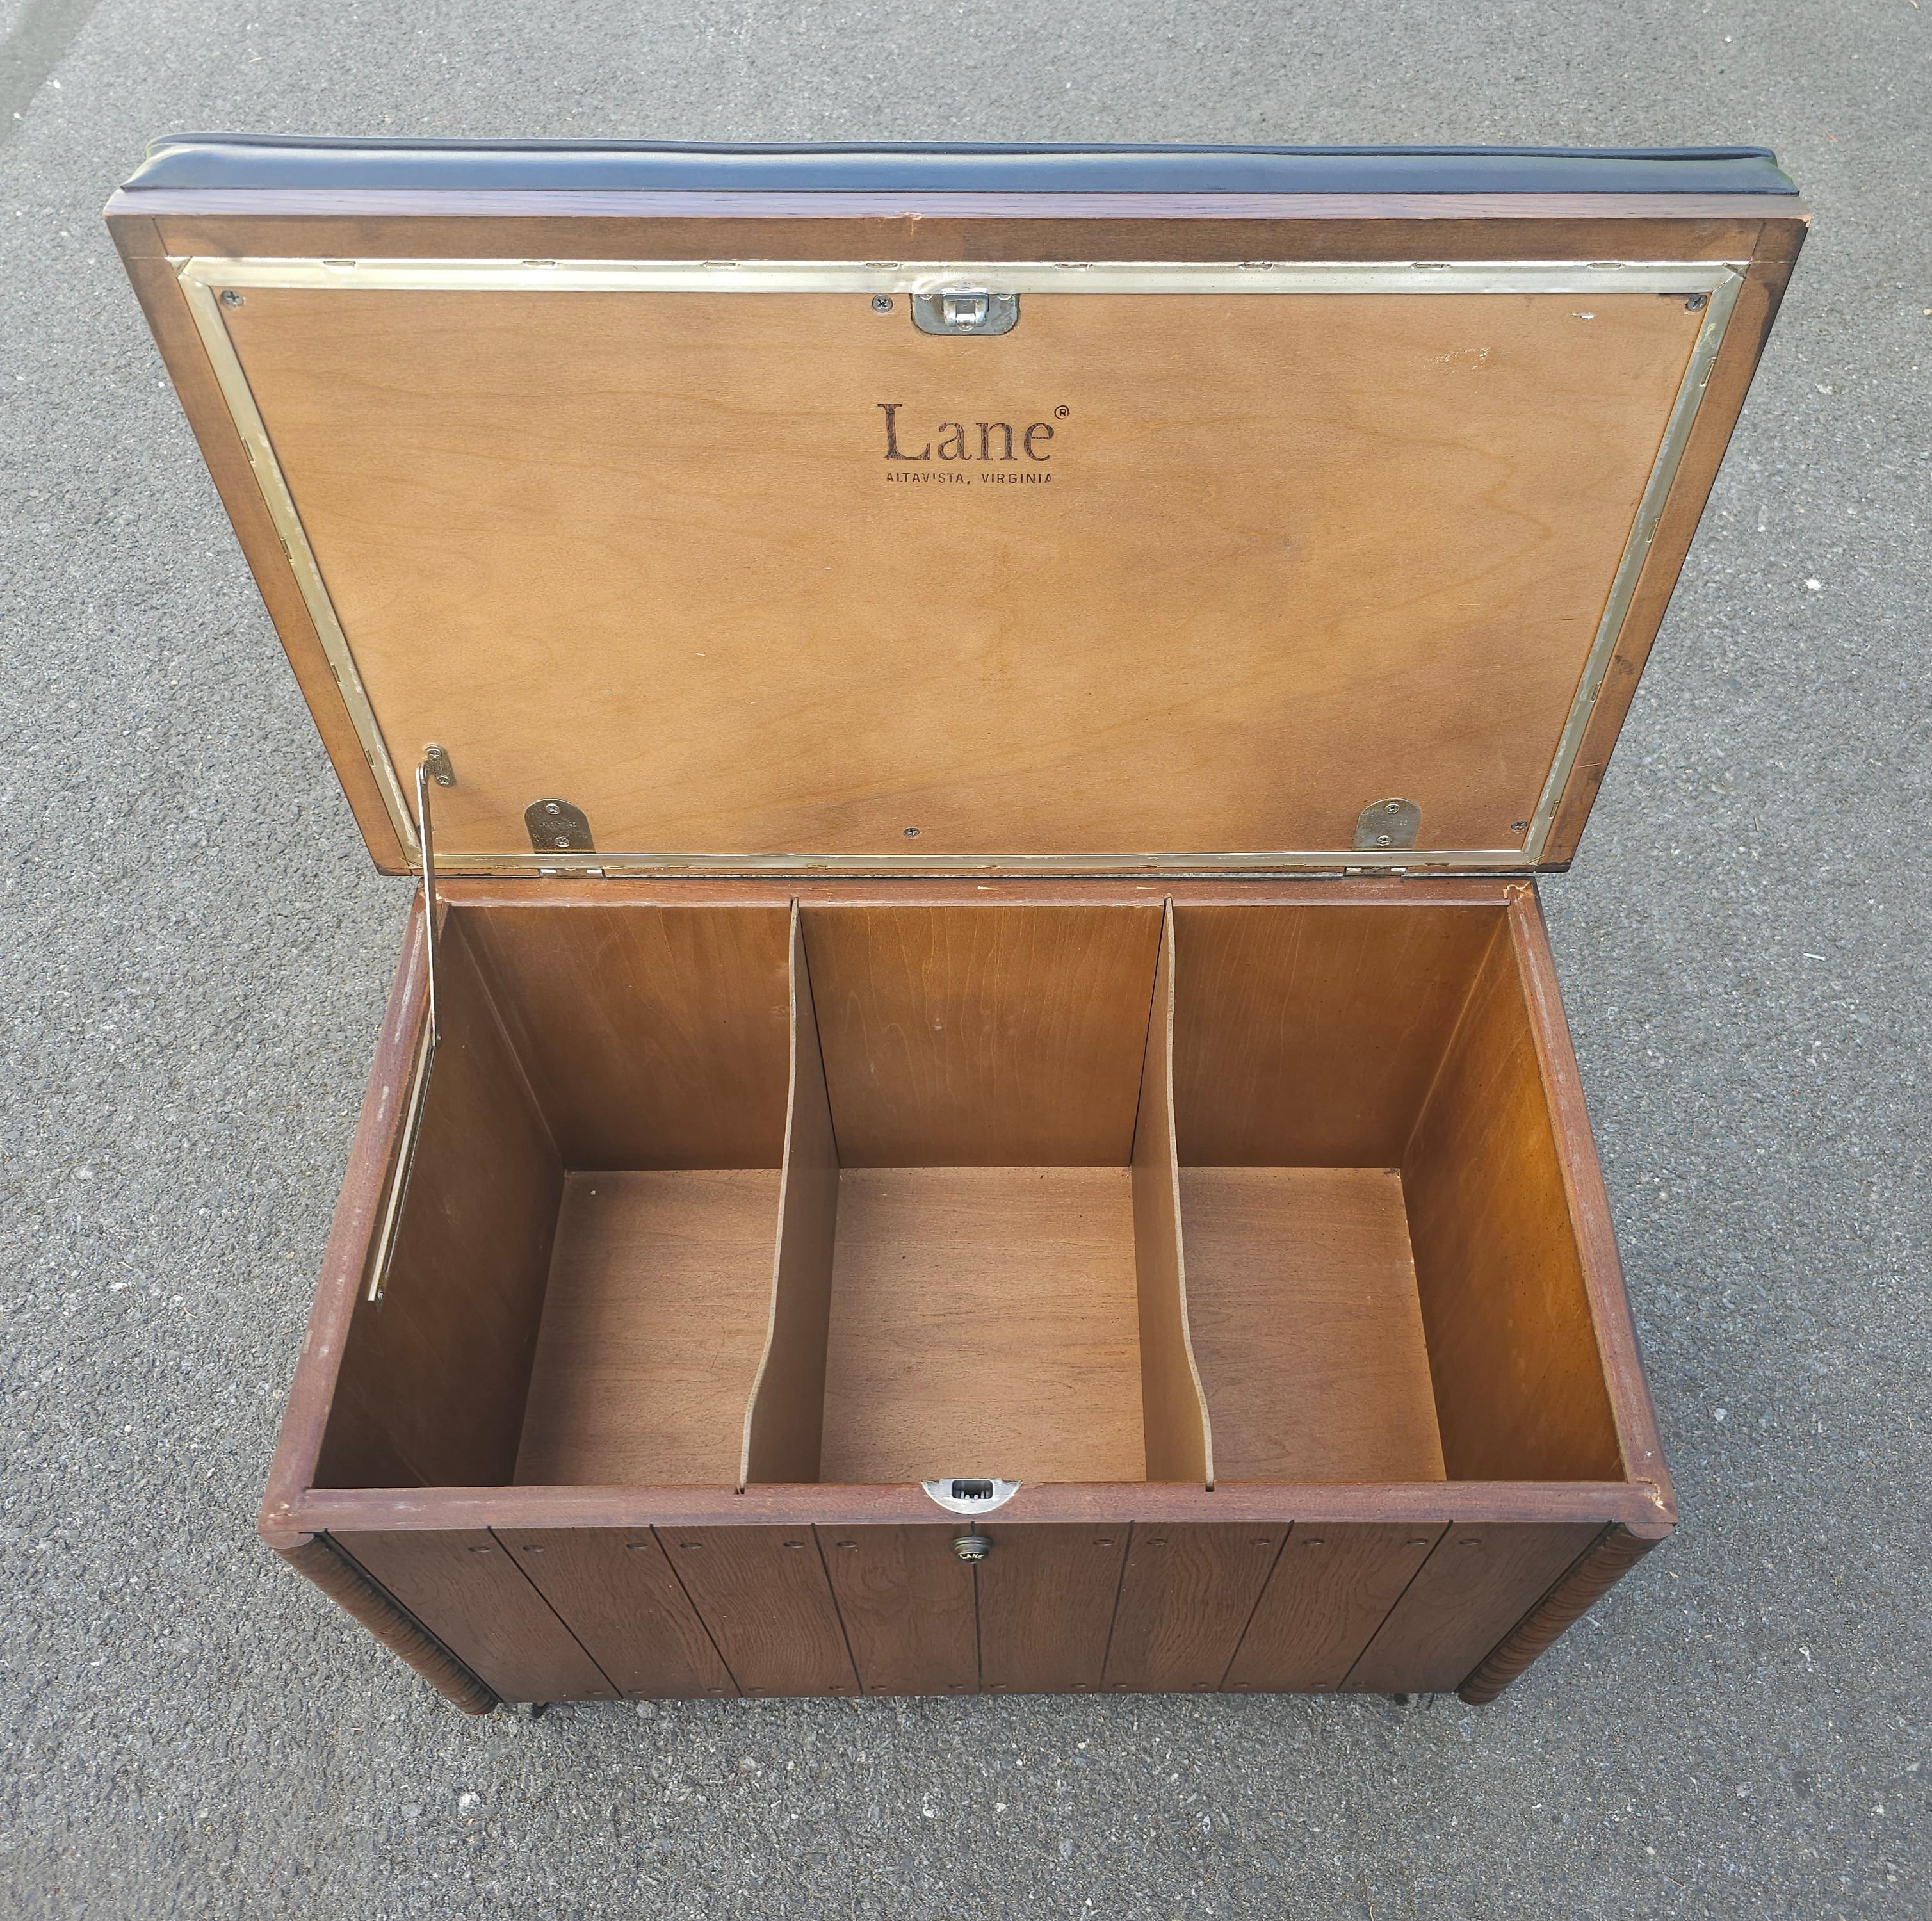 Lane Altavista Mid Century Rolling Records Cabinet, Storage Chest and Bench with padded seat. Measures 27.5